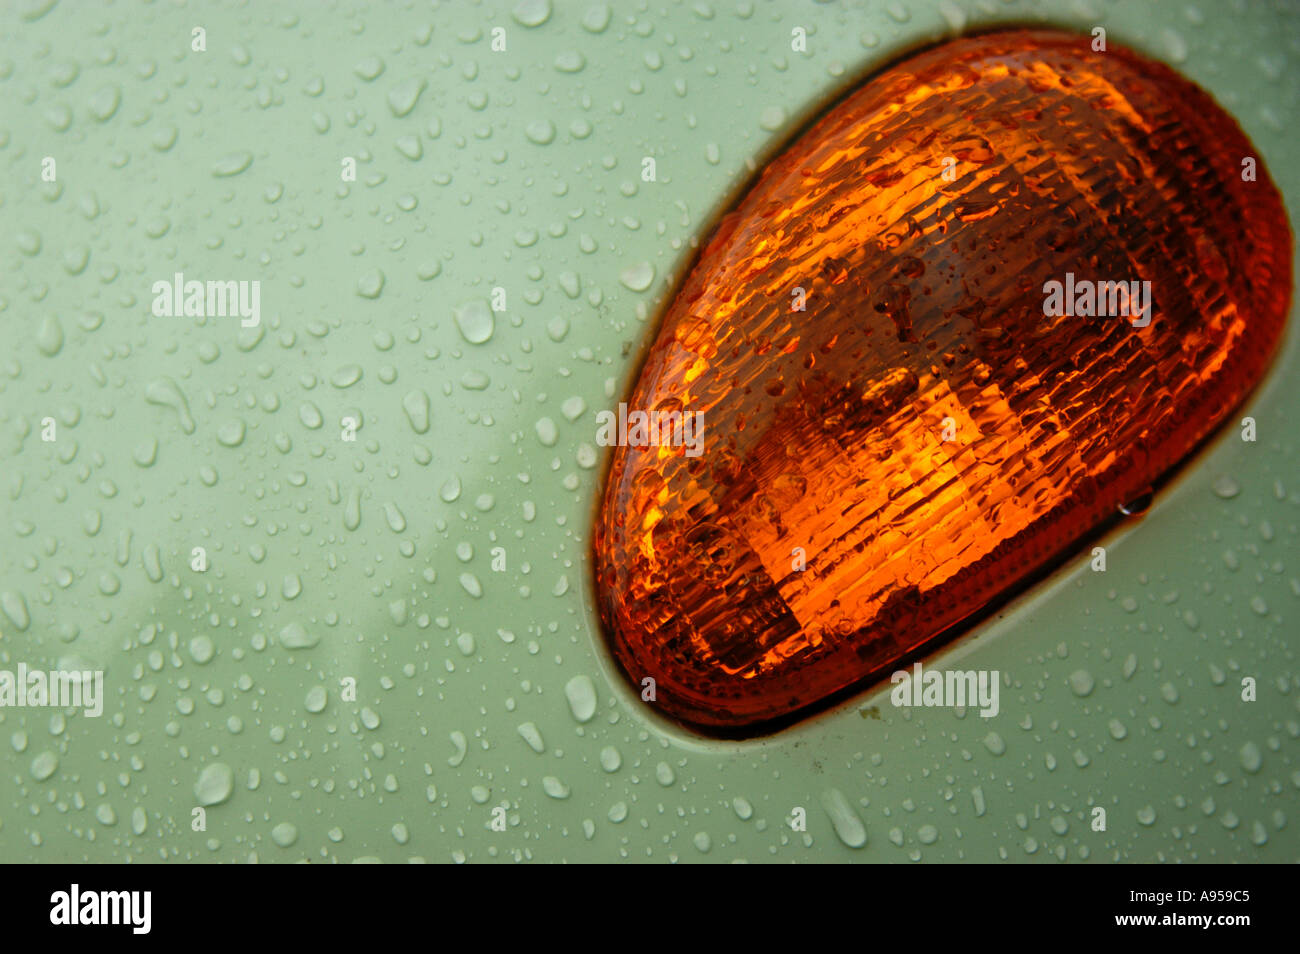 Detail of indicator light cluster on wet Vespa moped scooter, made by Piaggio. Shot in the pouring rain. Stock Photo